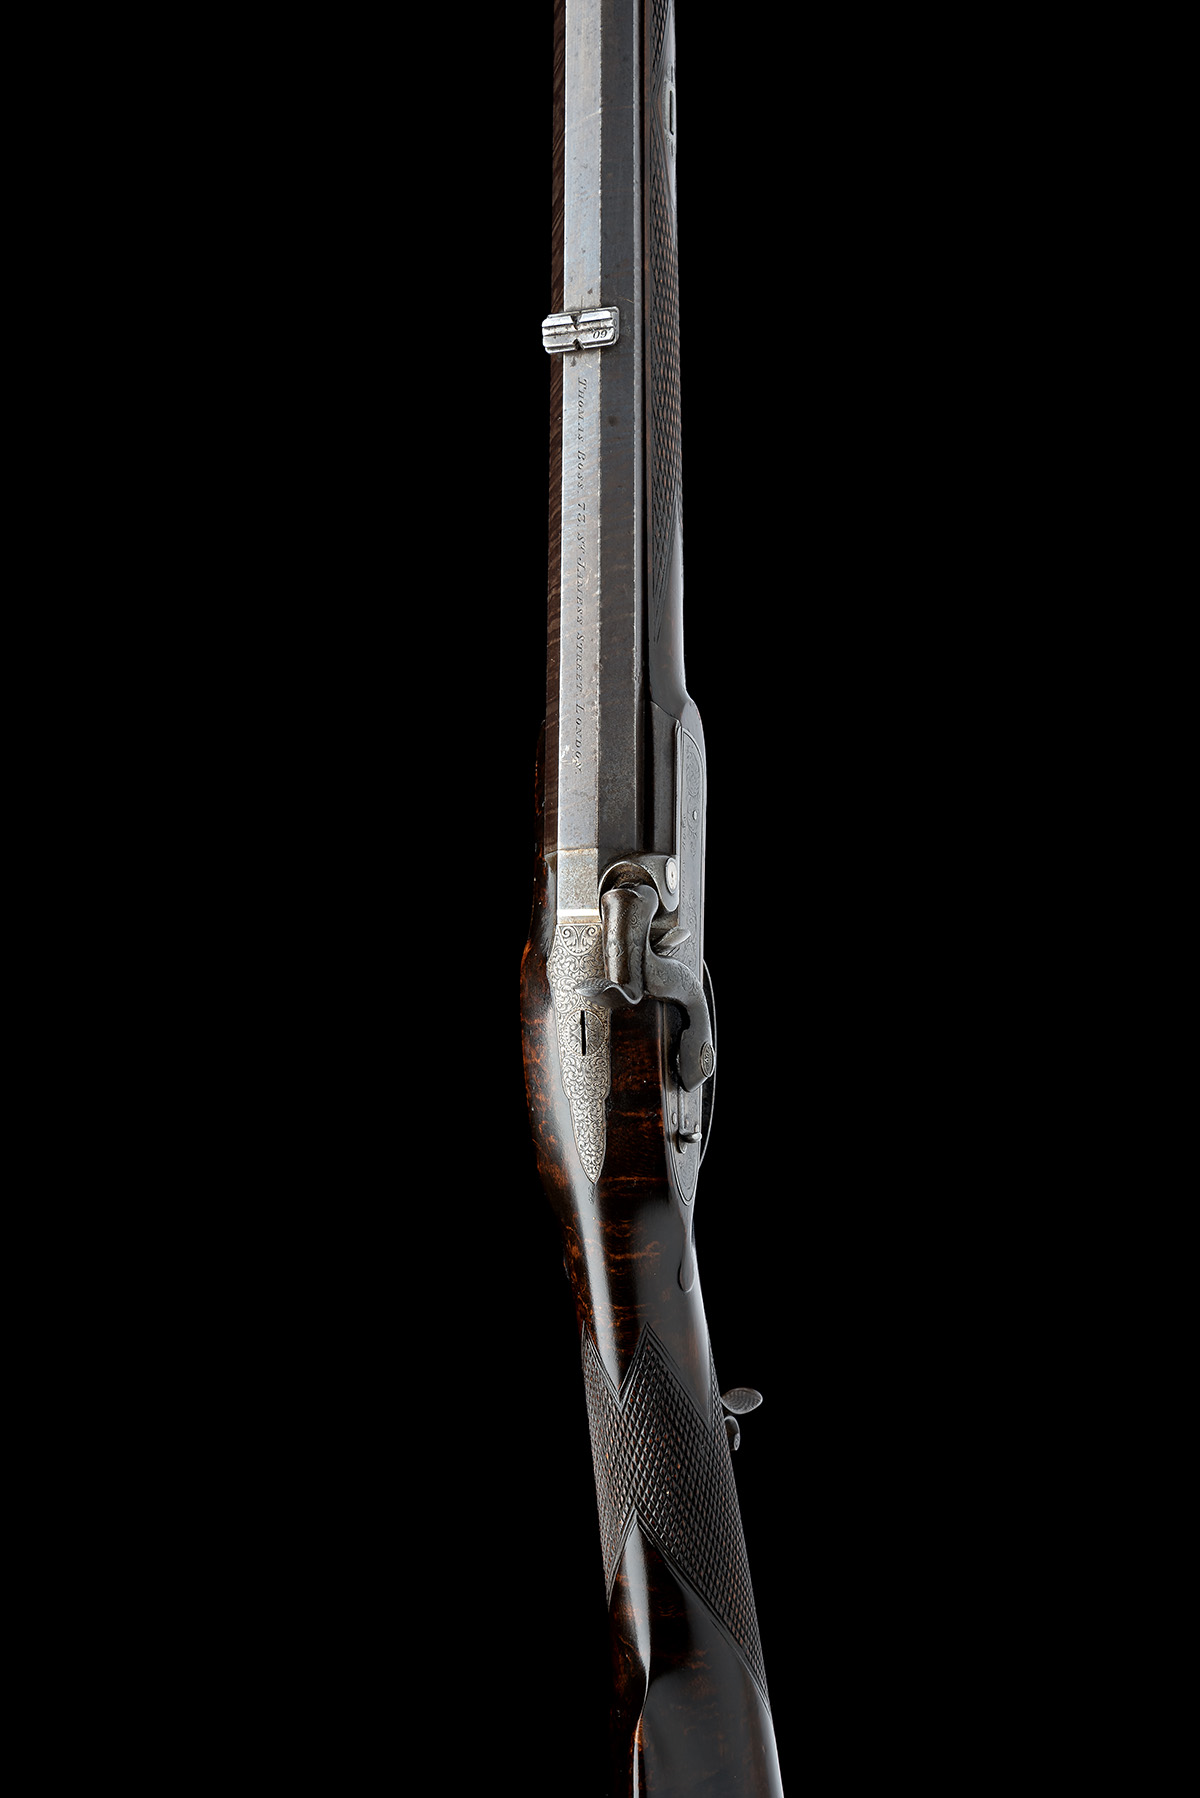 A FINE 60-BORE PERCUSSION 'PEA' RIFLE SIGNED THOMAS BOSS, LONDON, serial no. 895, for 1849, with - Image 4 of 9